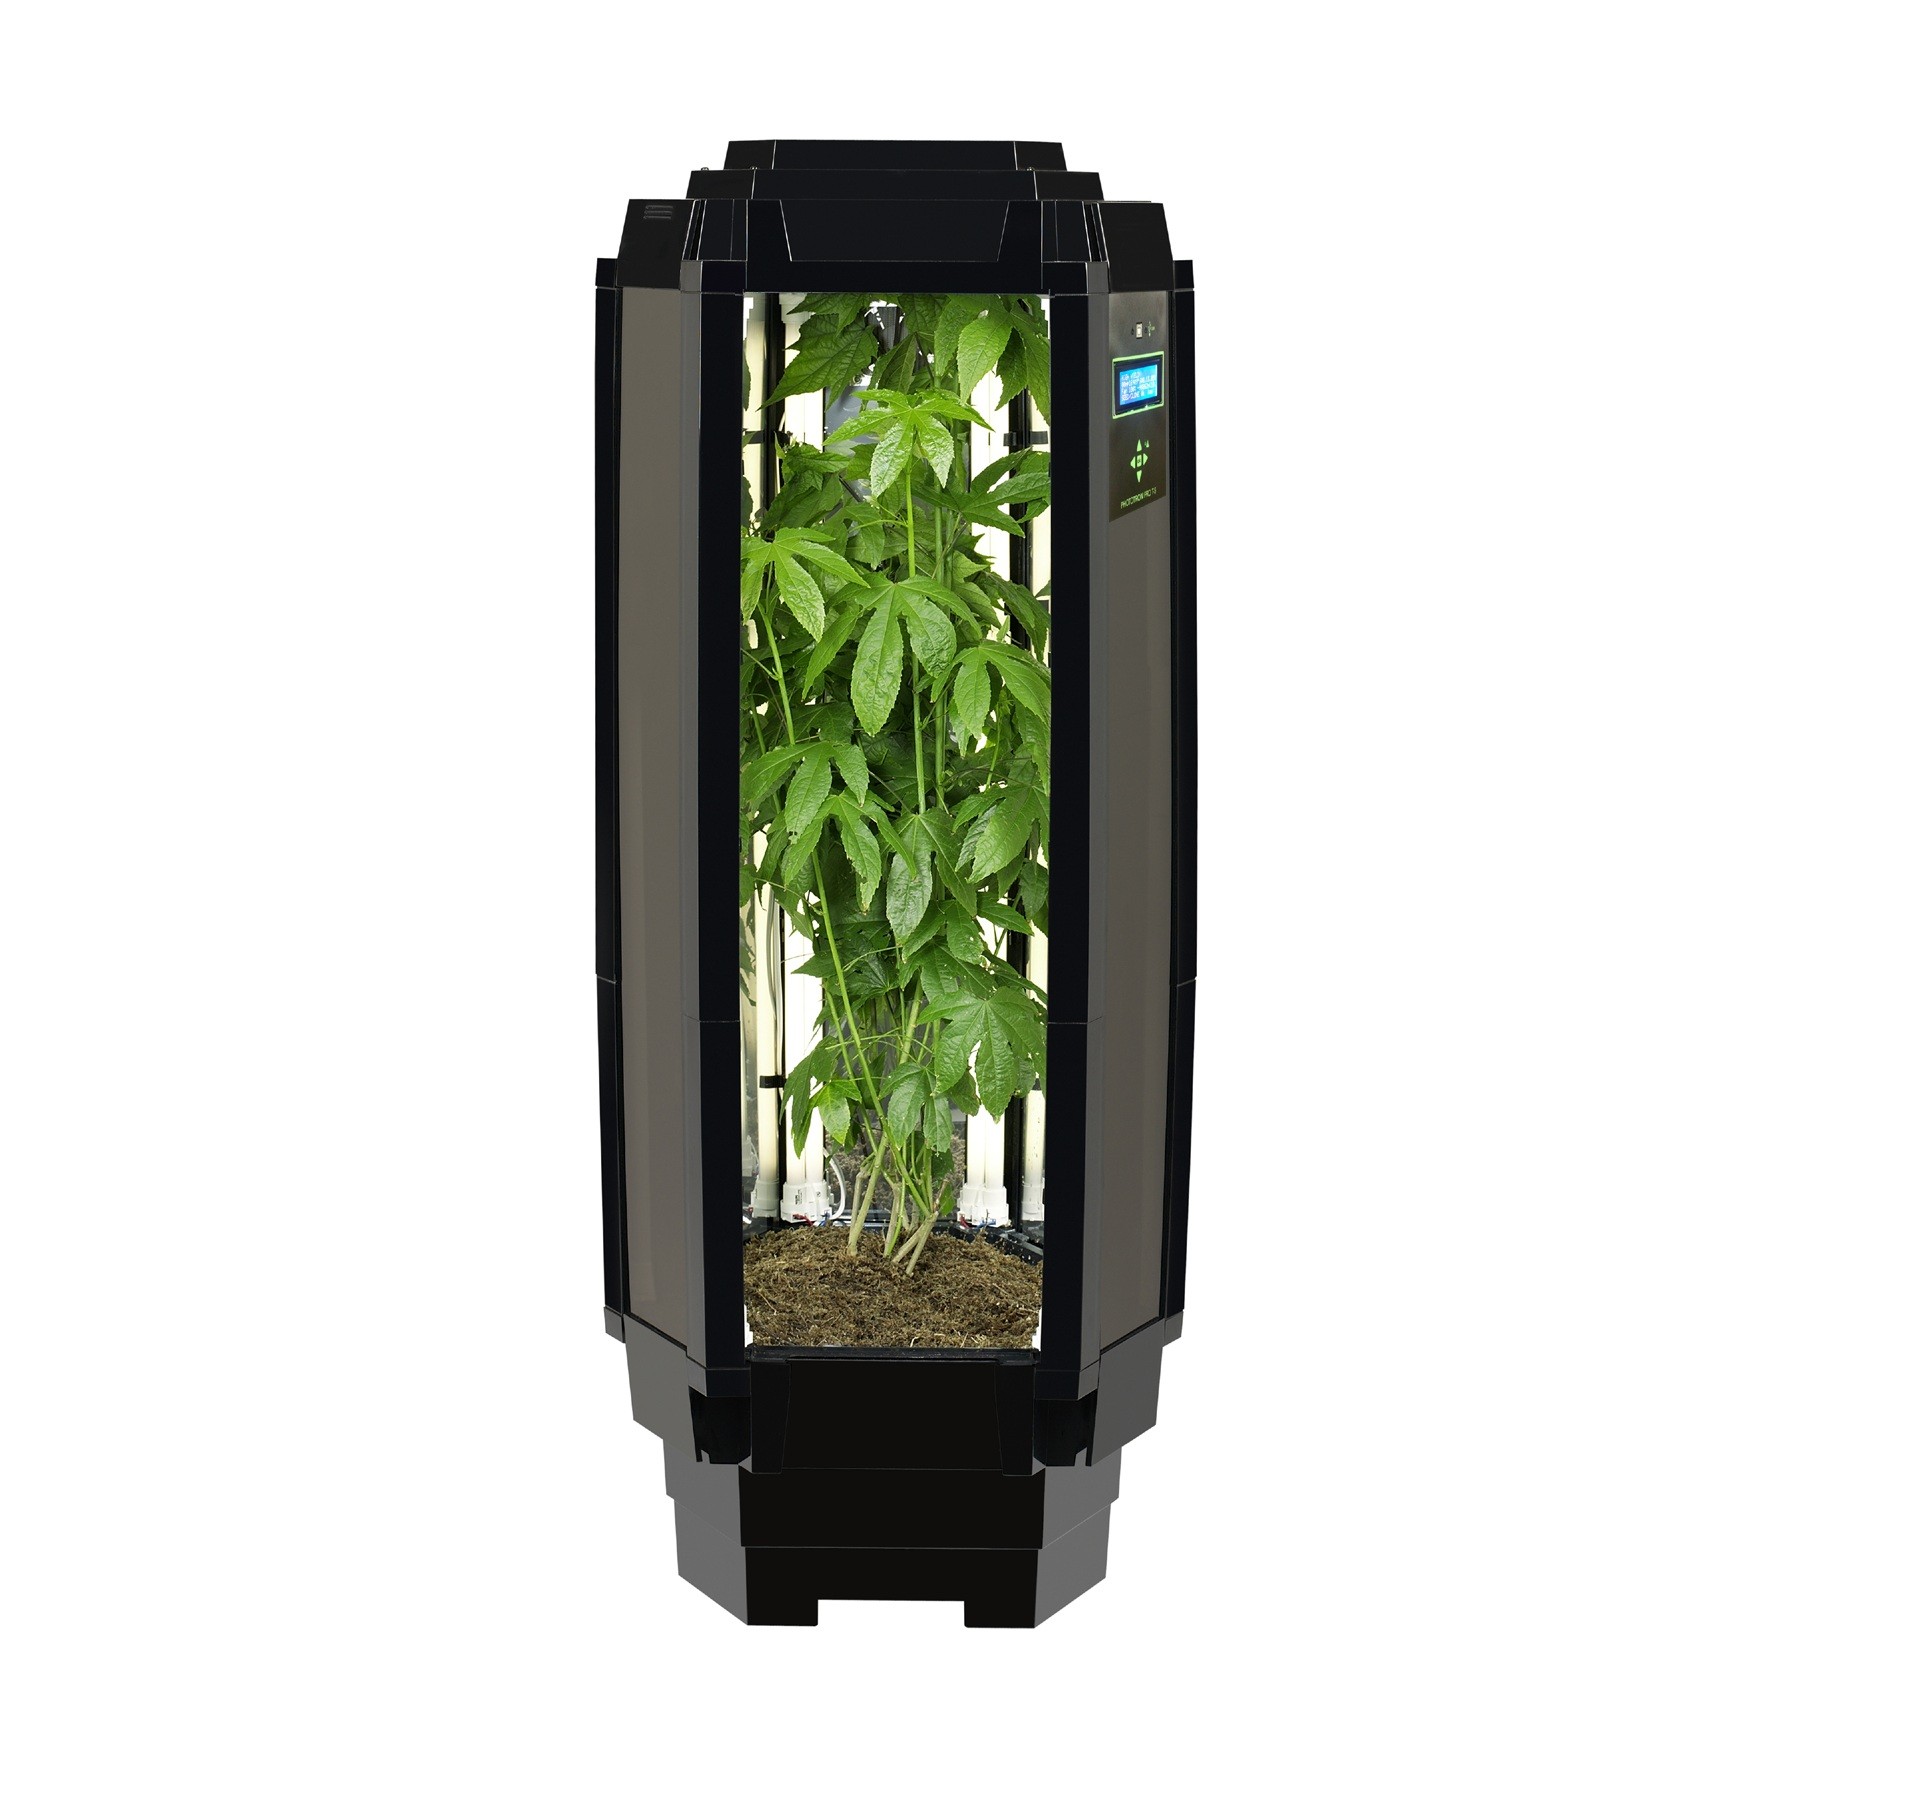 Best Hydroponic System? Phototron Says Consider 5 Key Factors when Choosing a System